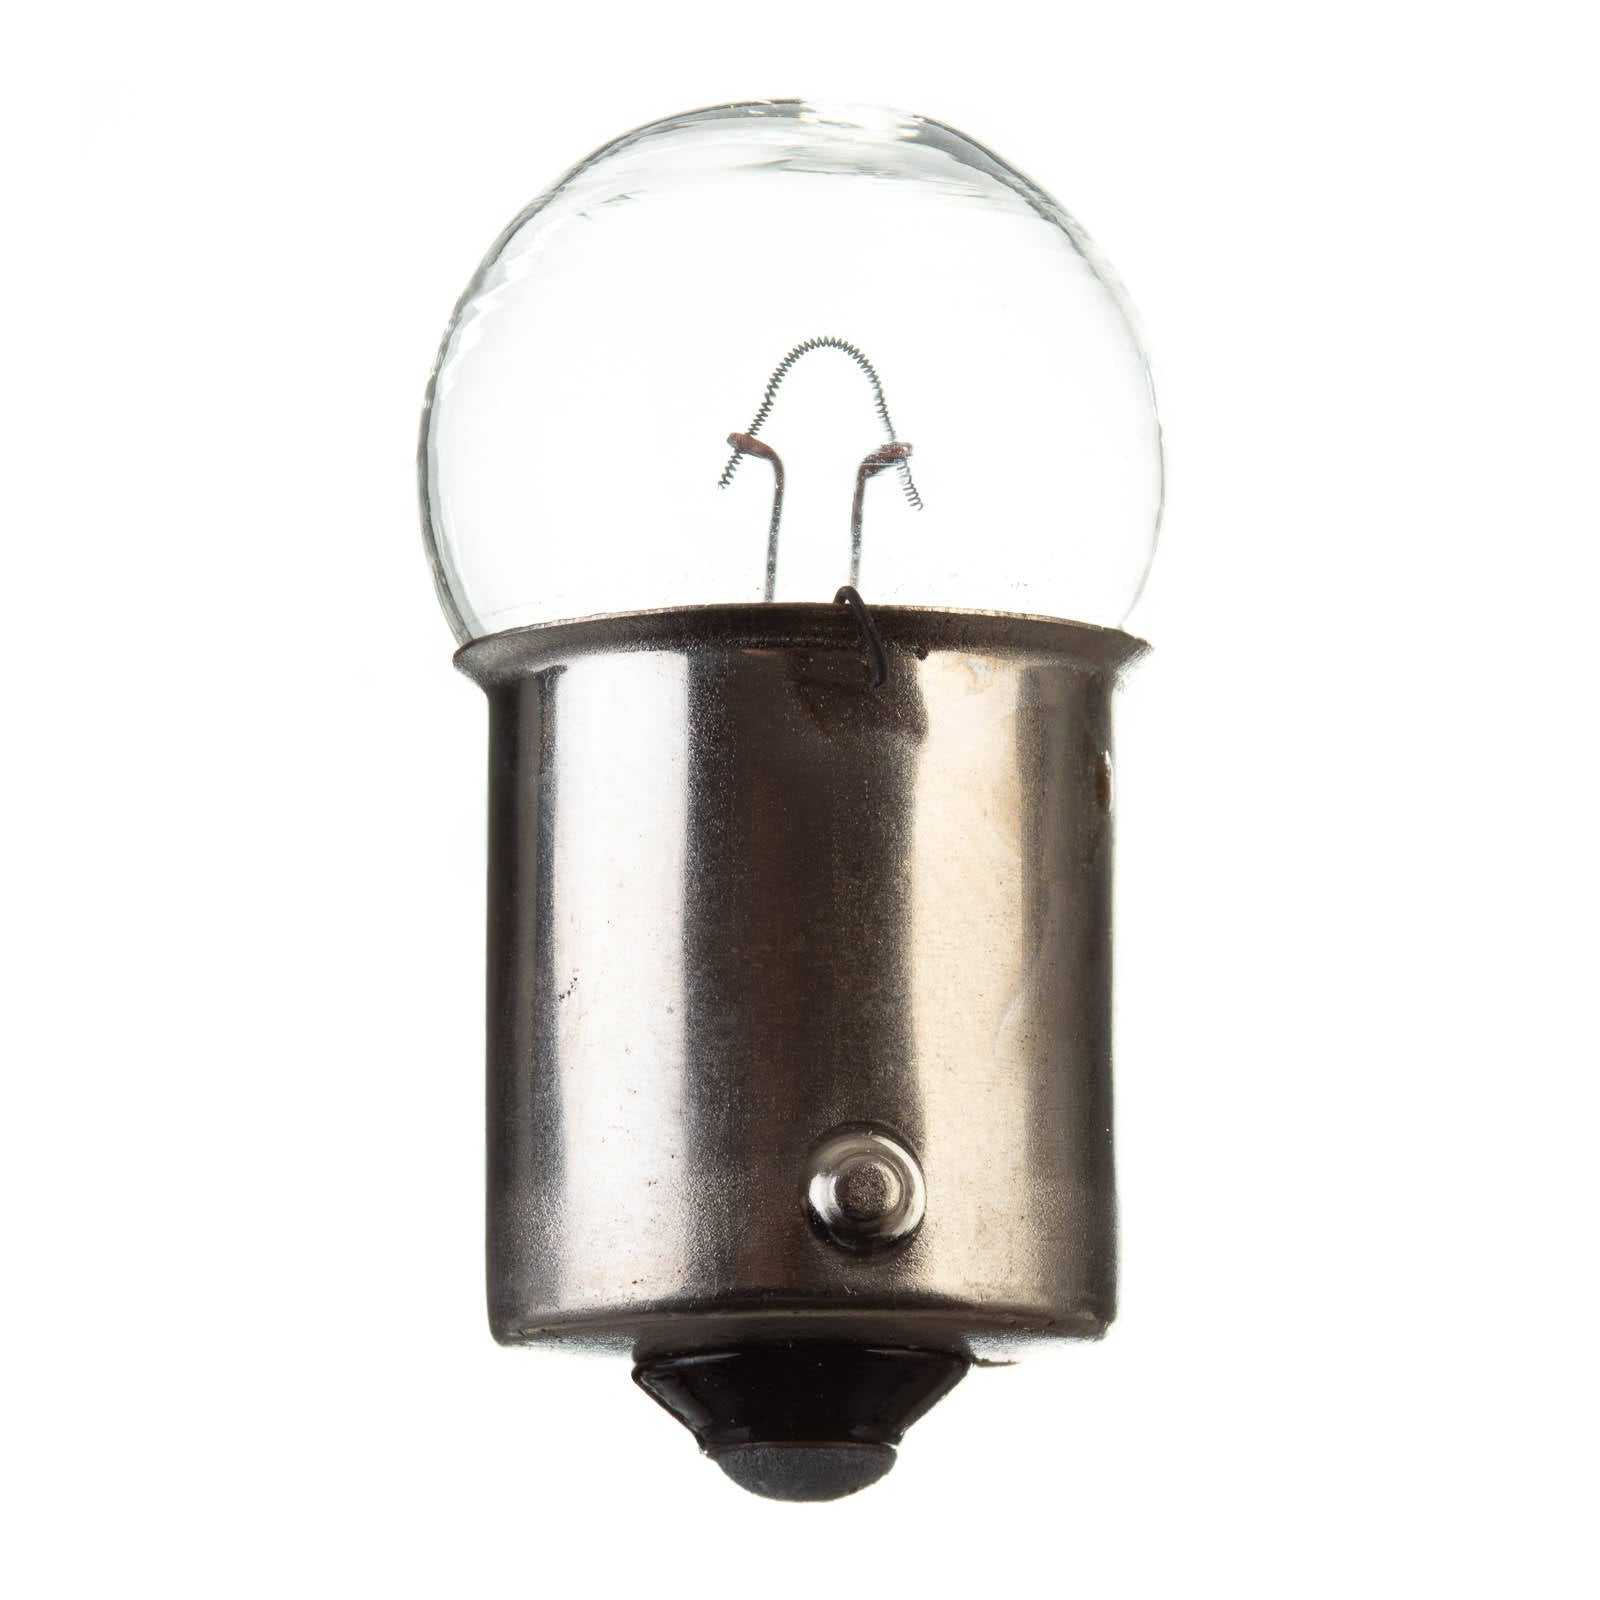 Whites Motorcycle Parts, BULBS 6V 10W Ind Bayonet Single (A4117) (Pkt of 10)